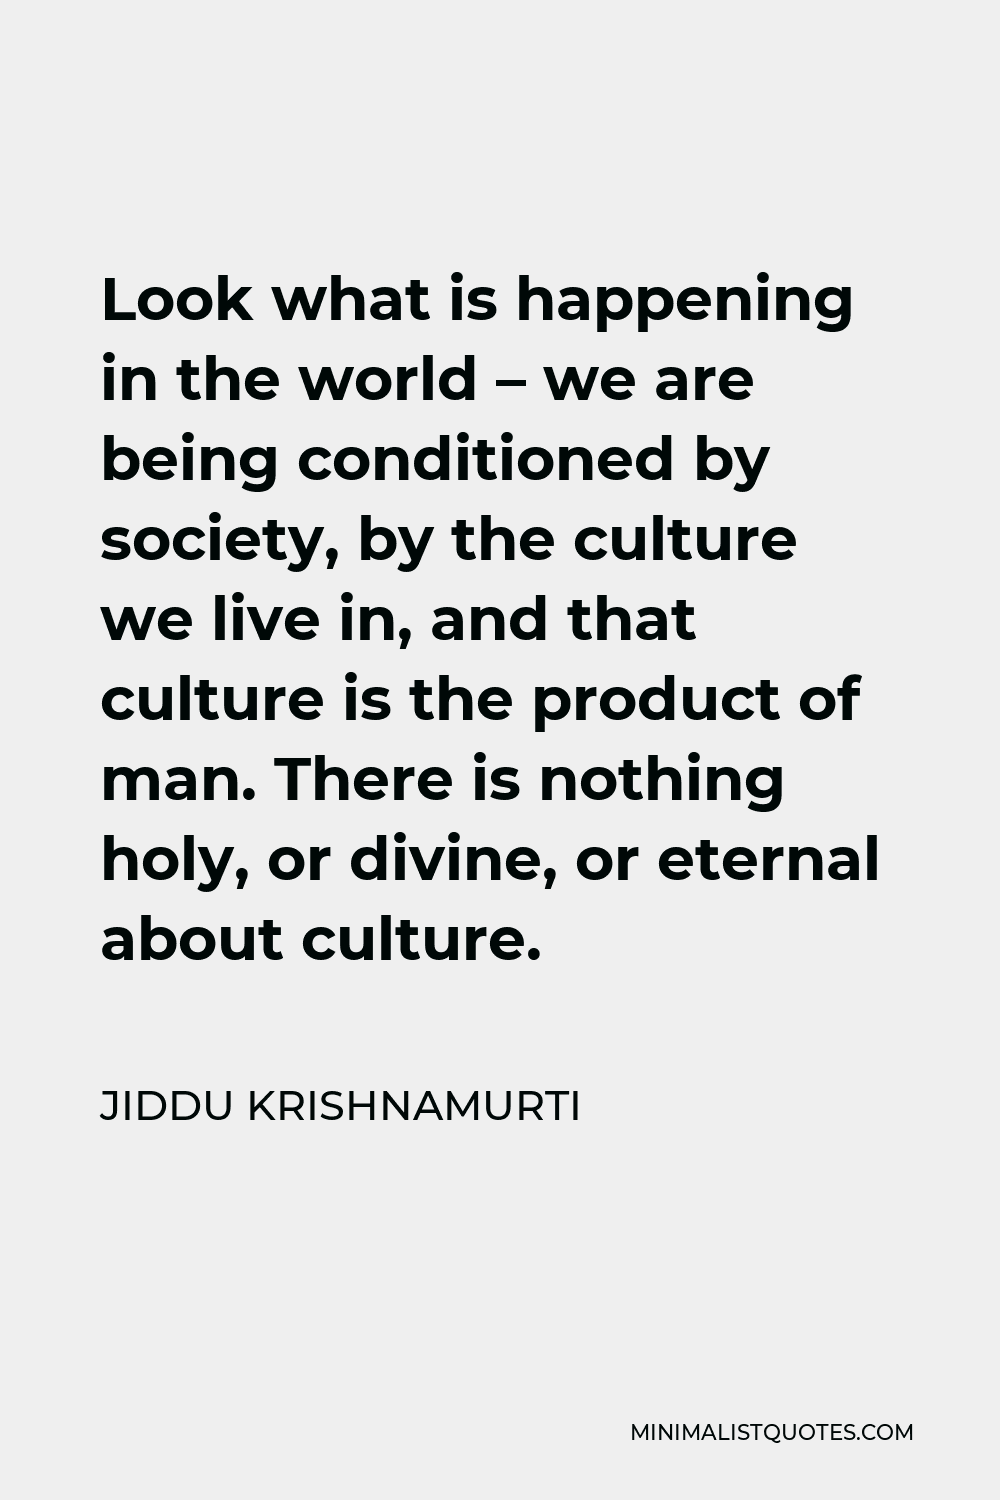 Jiddu Krishnamurti Quote - Look what is happening in the world – we are being conditioned by society, by the culture we live in, and that culture is the product of man. There is nothing holy, or divine, or eternal about culture.